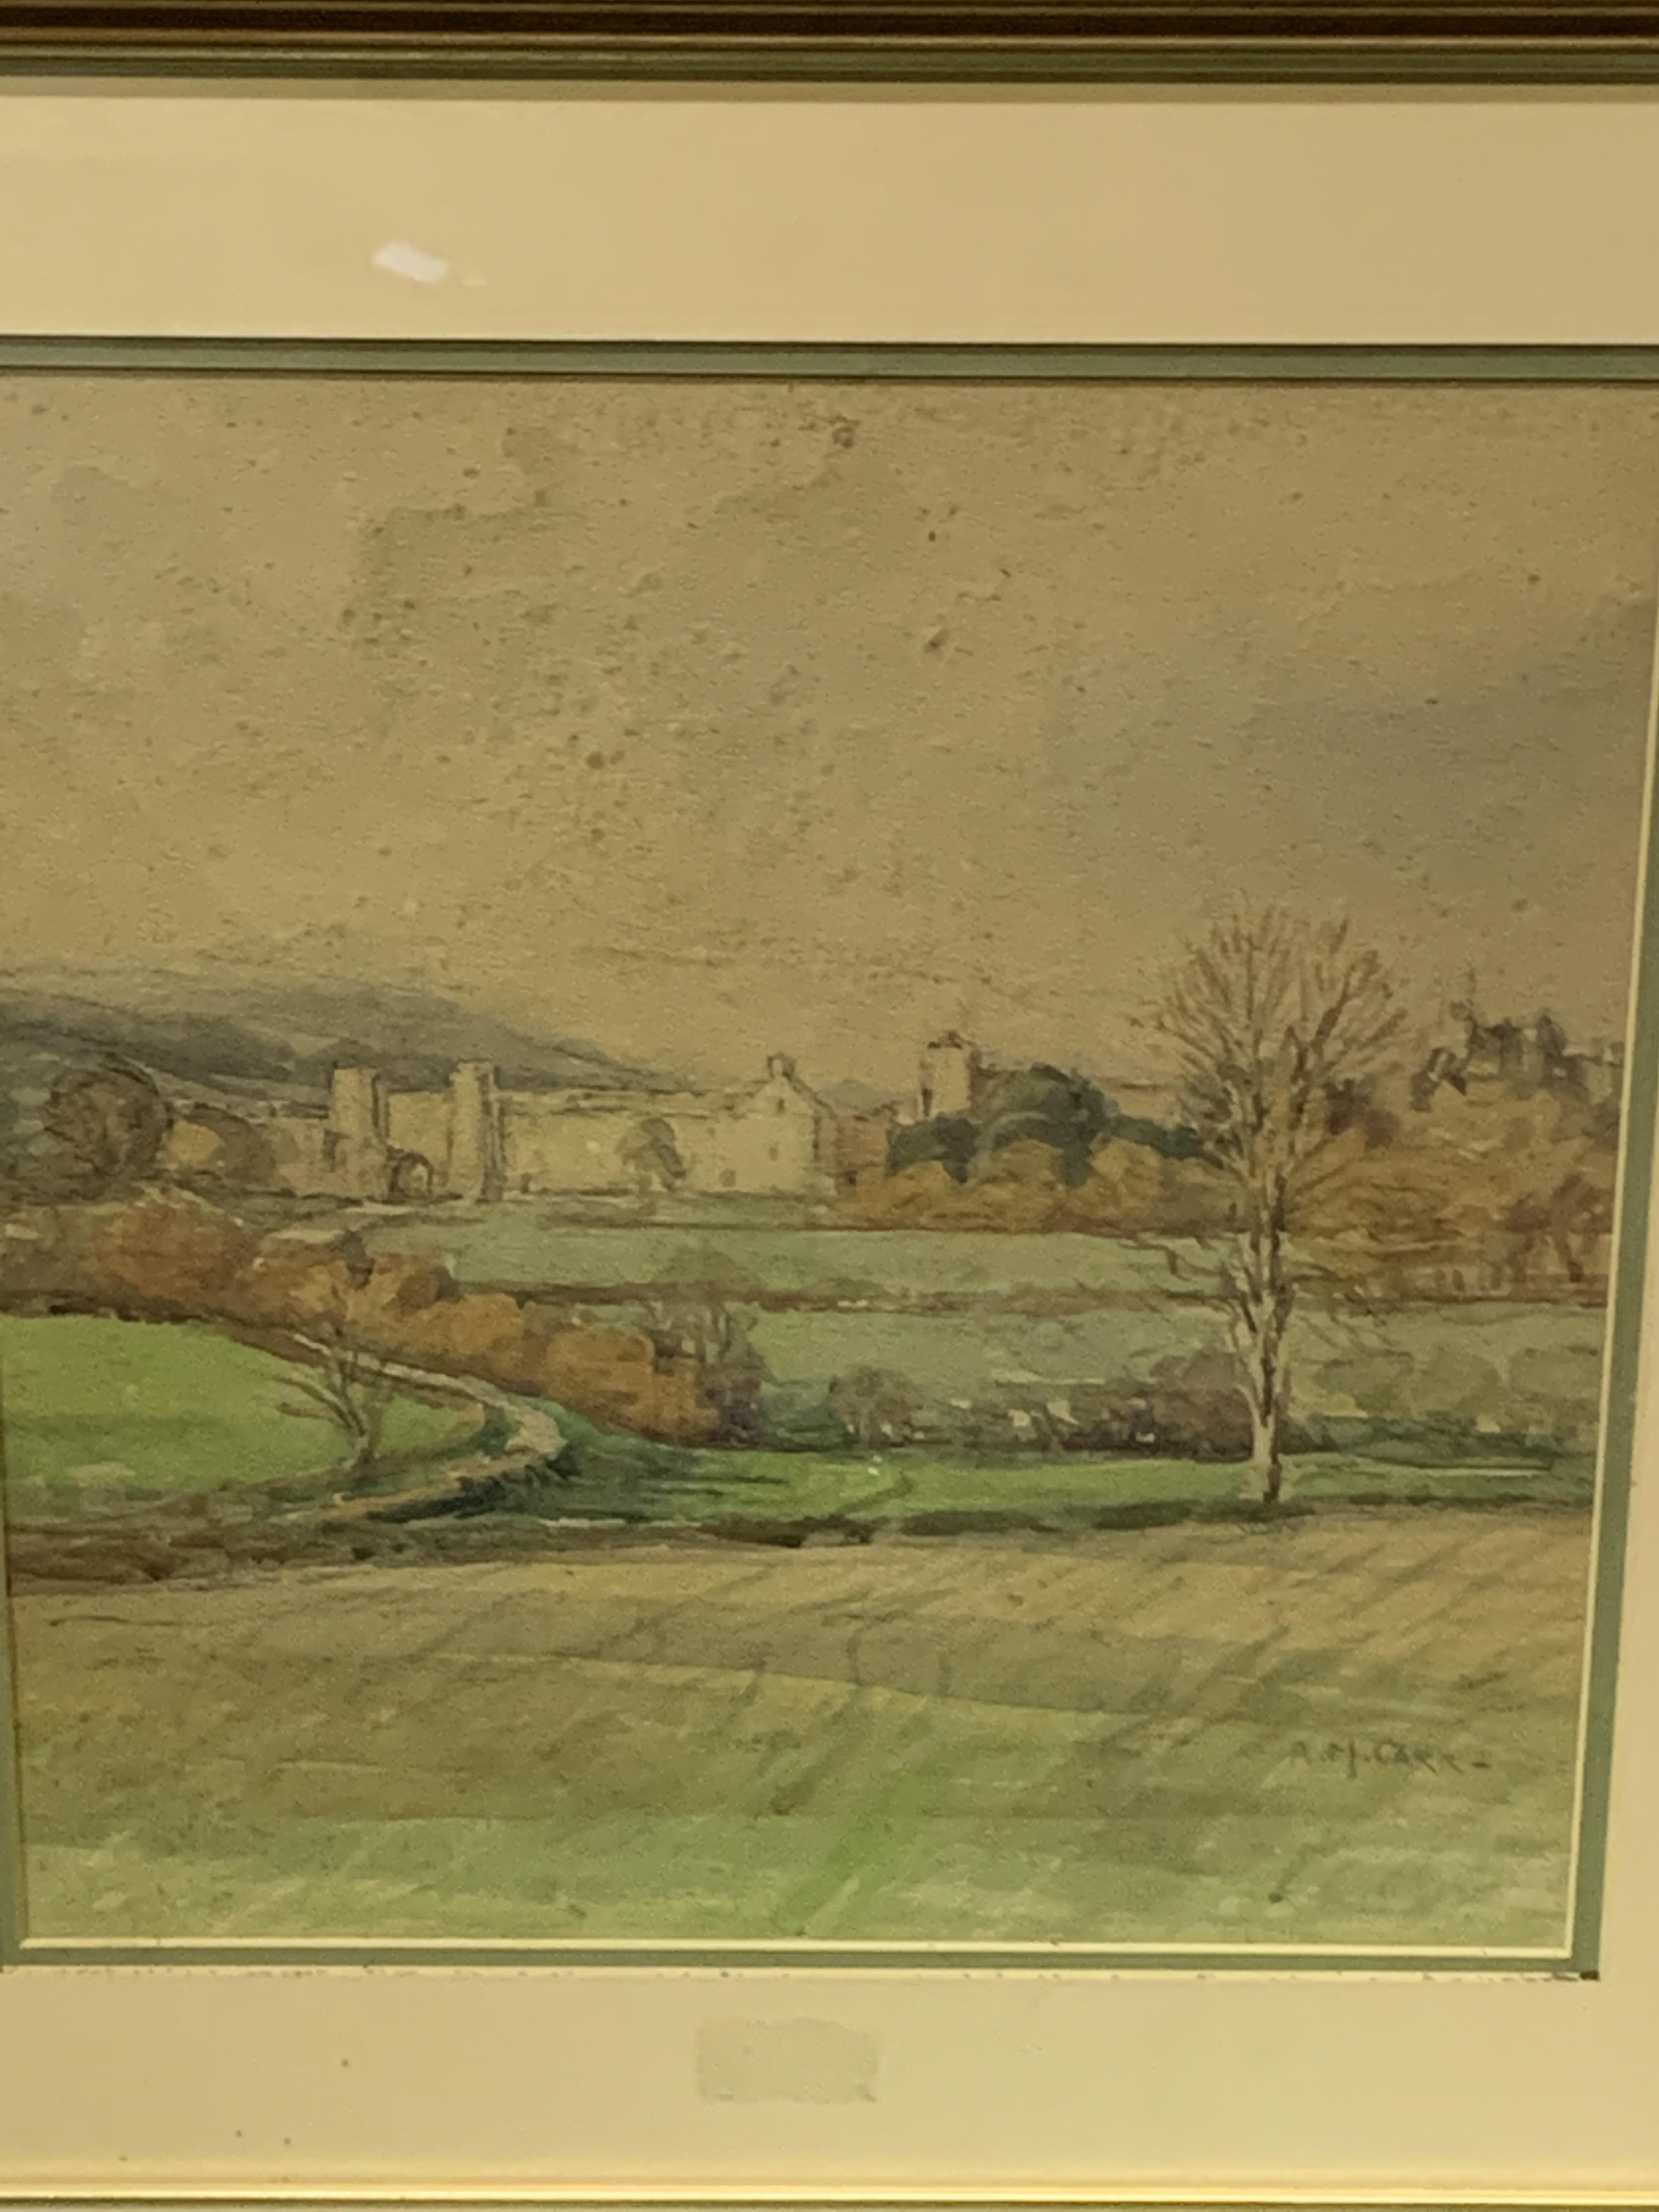 Two rural landscape watercolours by A.M. Carr and F.N. Colwell. - Image 2 of 4